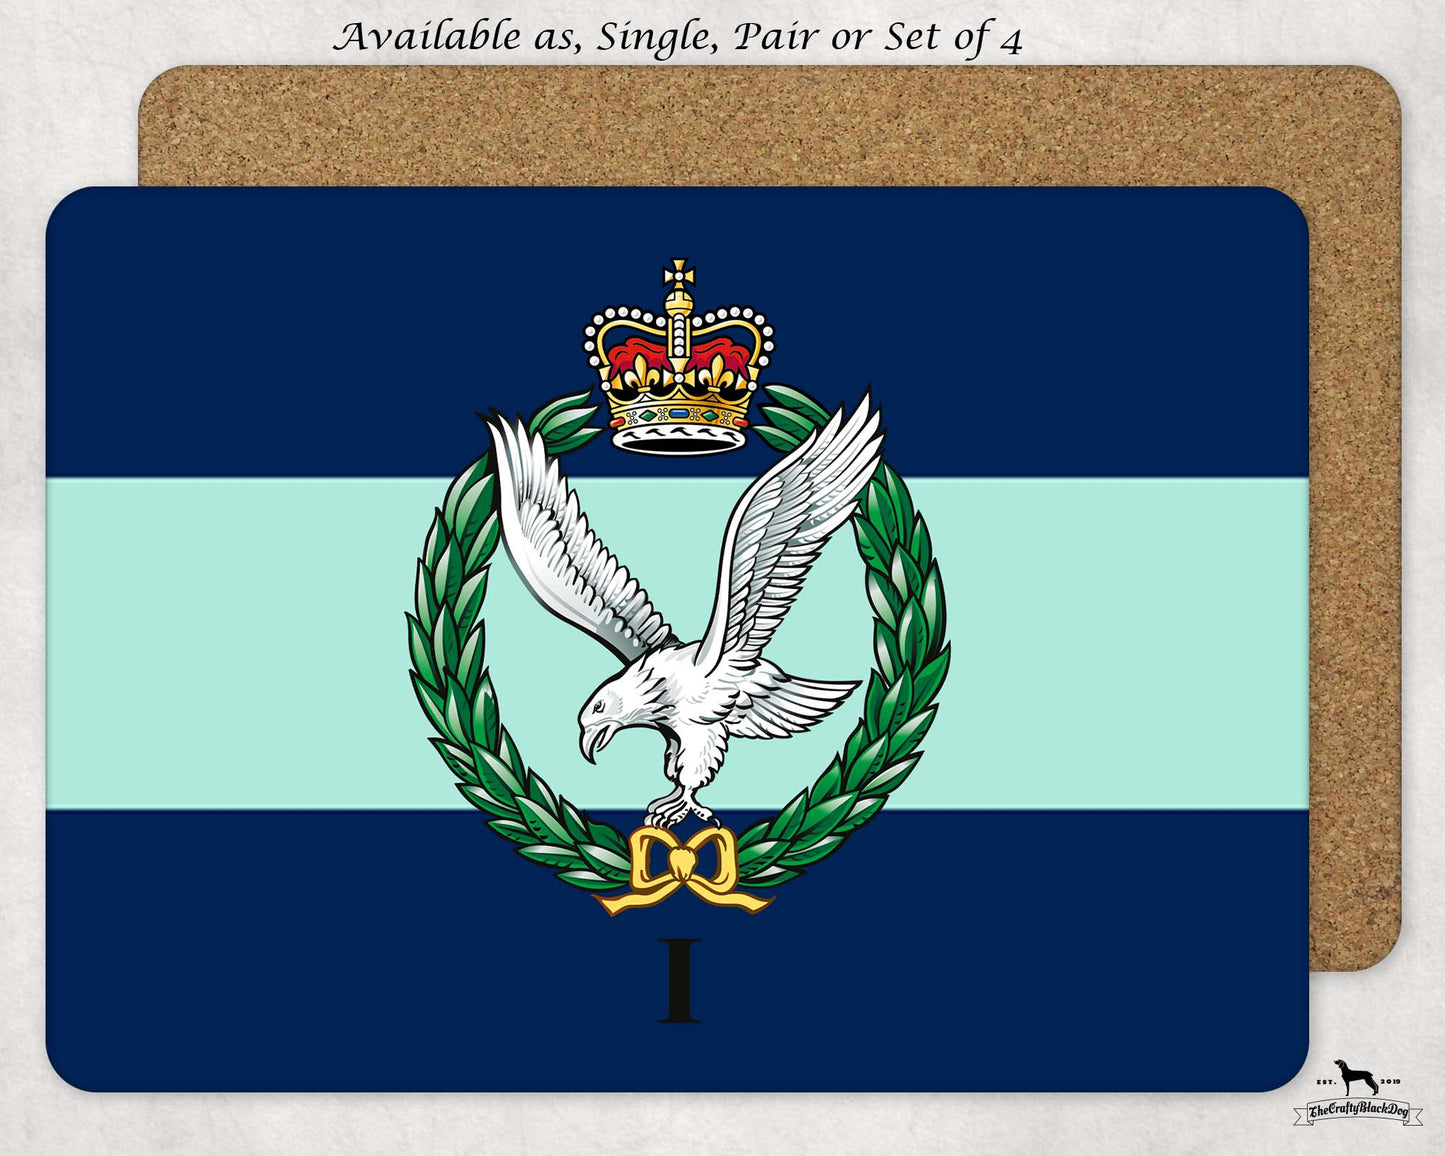 1 Army Air Corps - Placemat(s)